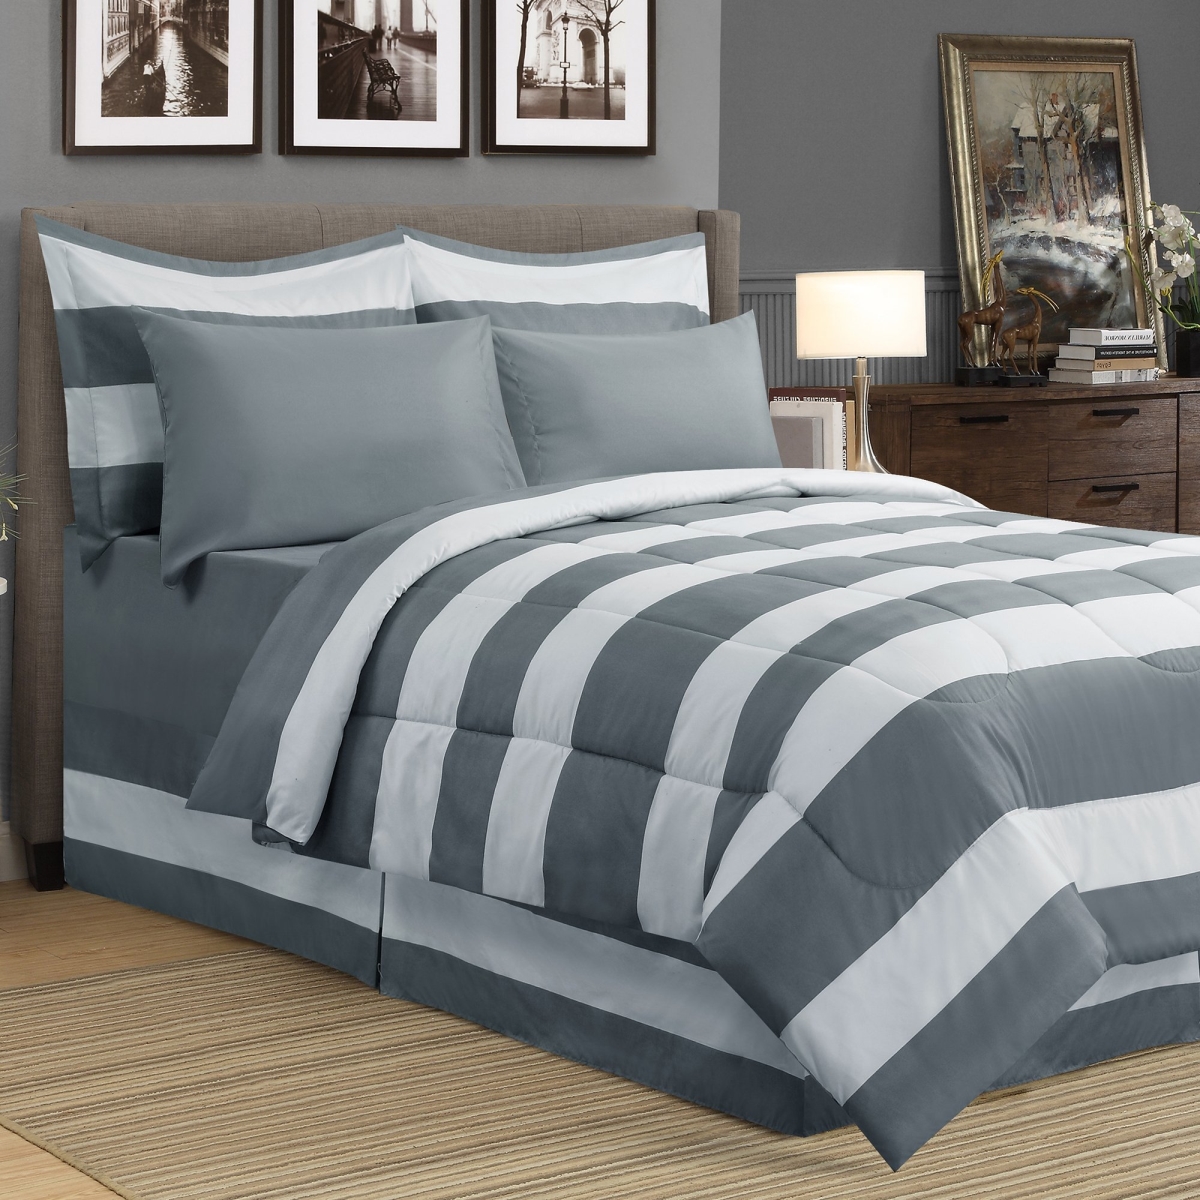 8 Piece Hamshire Bed In A Bag Comforter Set, Grey - Double Size